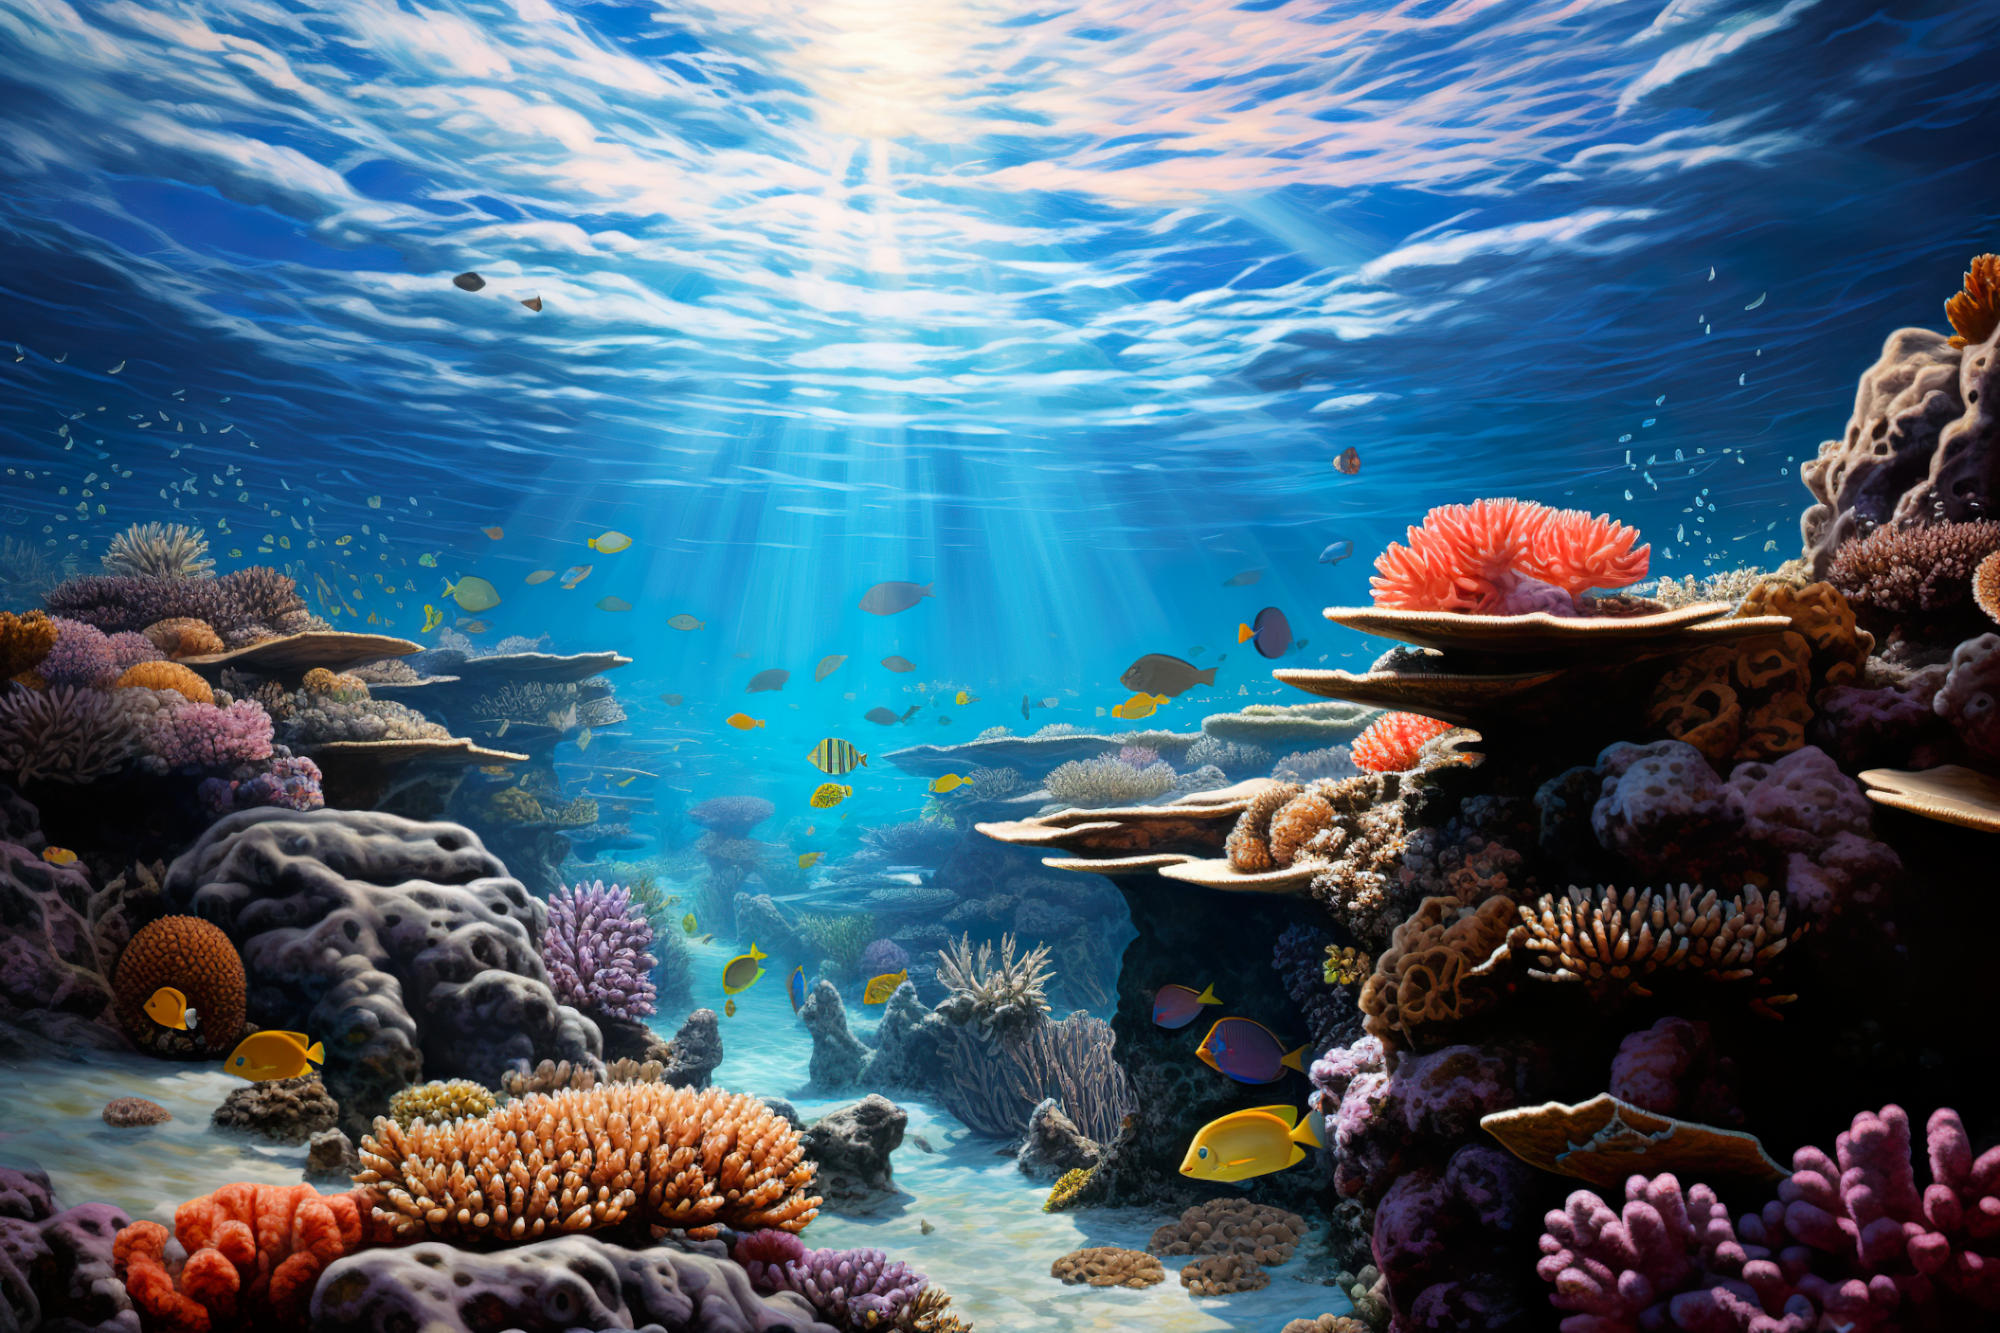 https://scitechdaily.com/images/Great-Barrier-Reef-Illustration.jpg